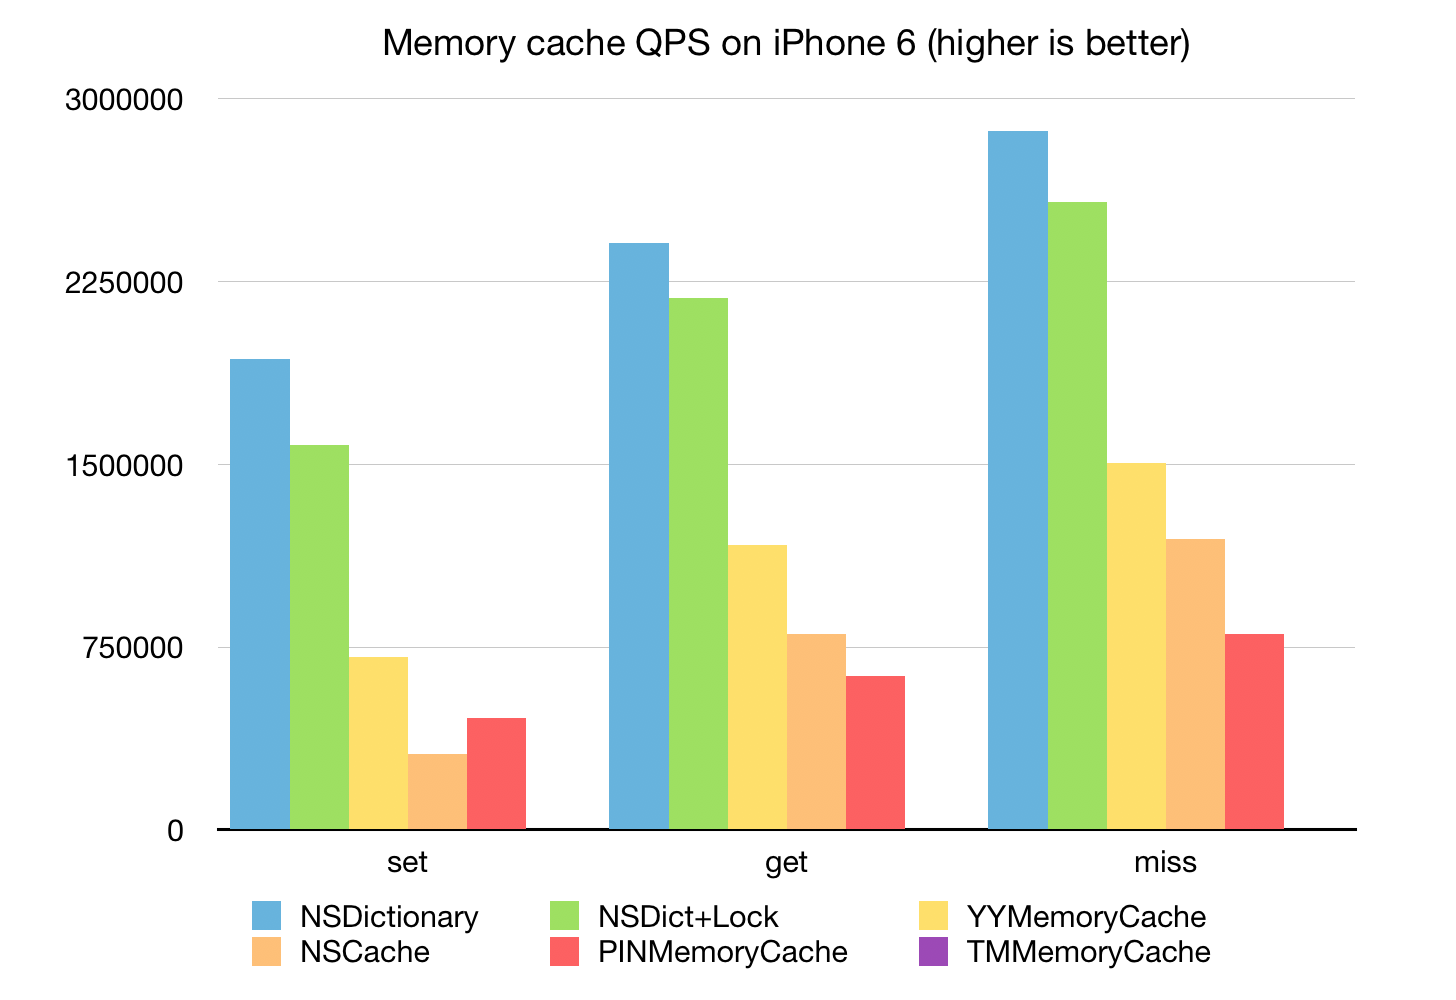 Memory cache benchmark result